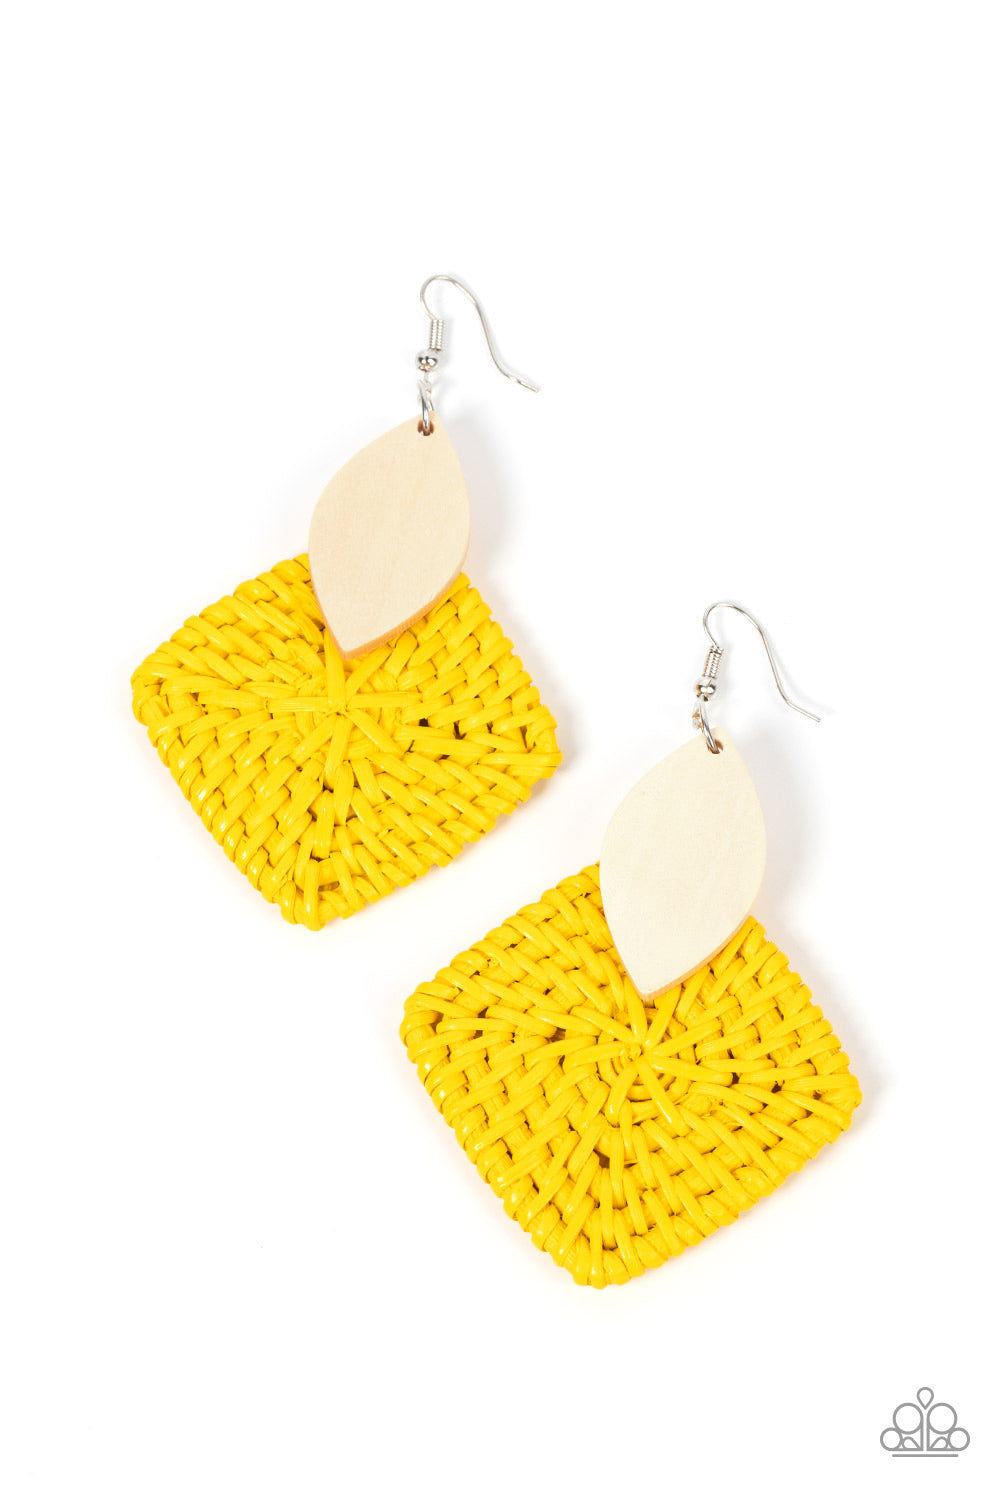 Sabbatical WEAVE - Yellow Wood Earring - A Finishing Touch Jewelry